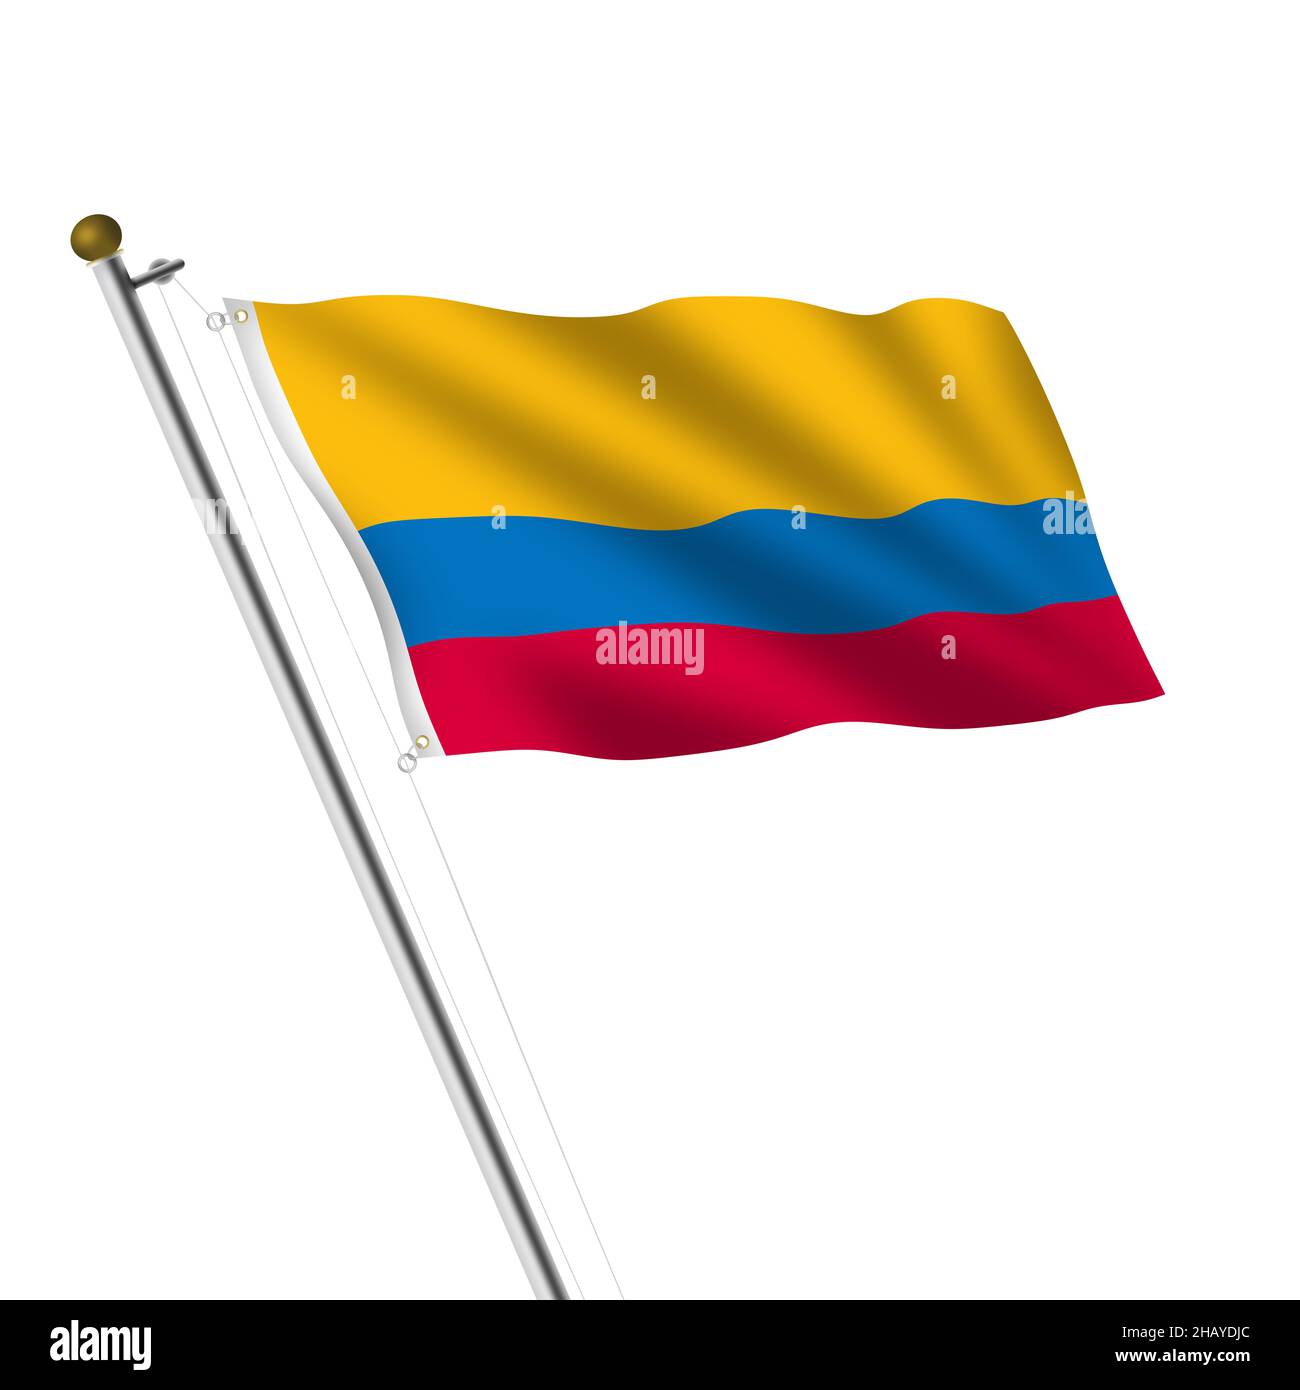 Colombia Flagpole 3d illustration on white with clipping path Stock Photo